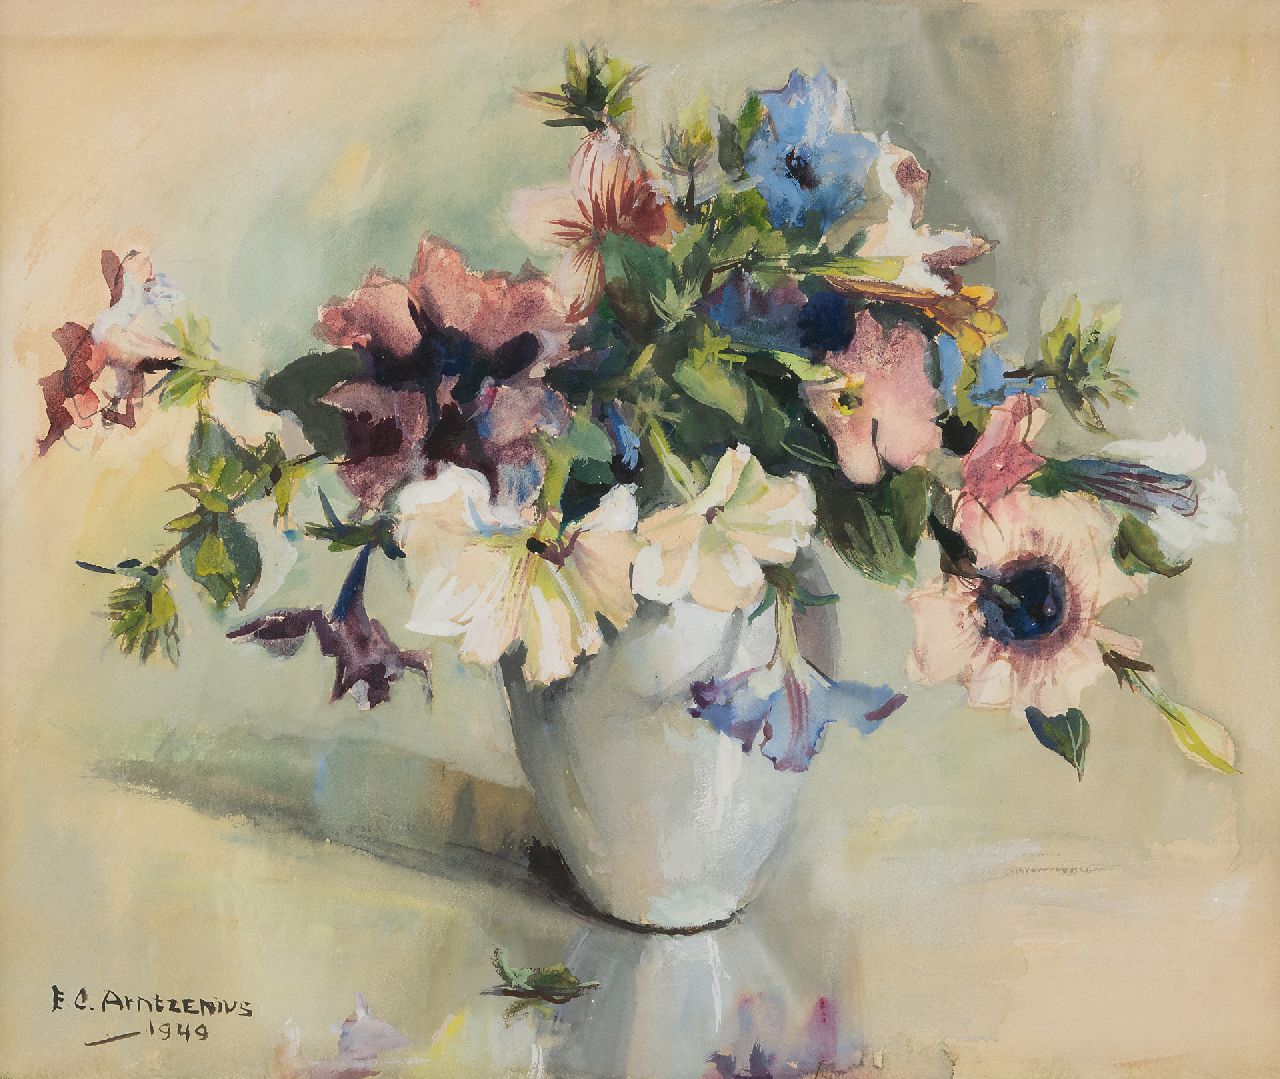 Arntzenius E.C.  | Elise Claudine Arntzenius | Watercolours and drawings offered for sale | Flowers in a white vase, watercolour on paper 36.6 x 43.0 cm, signed l.l. and dated 1949